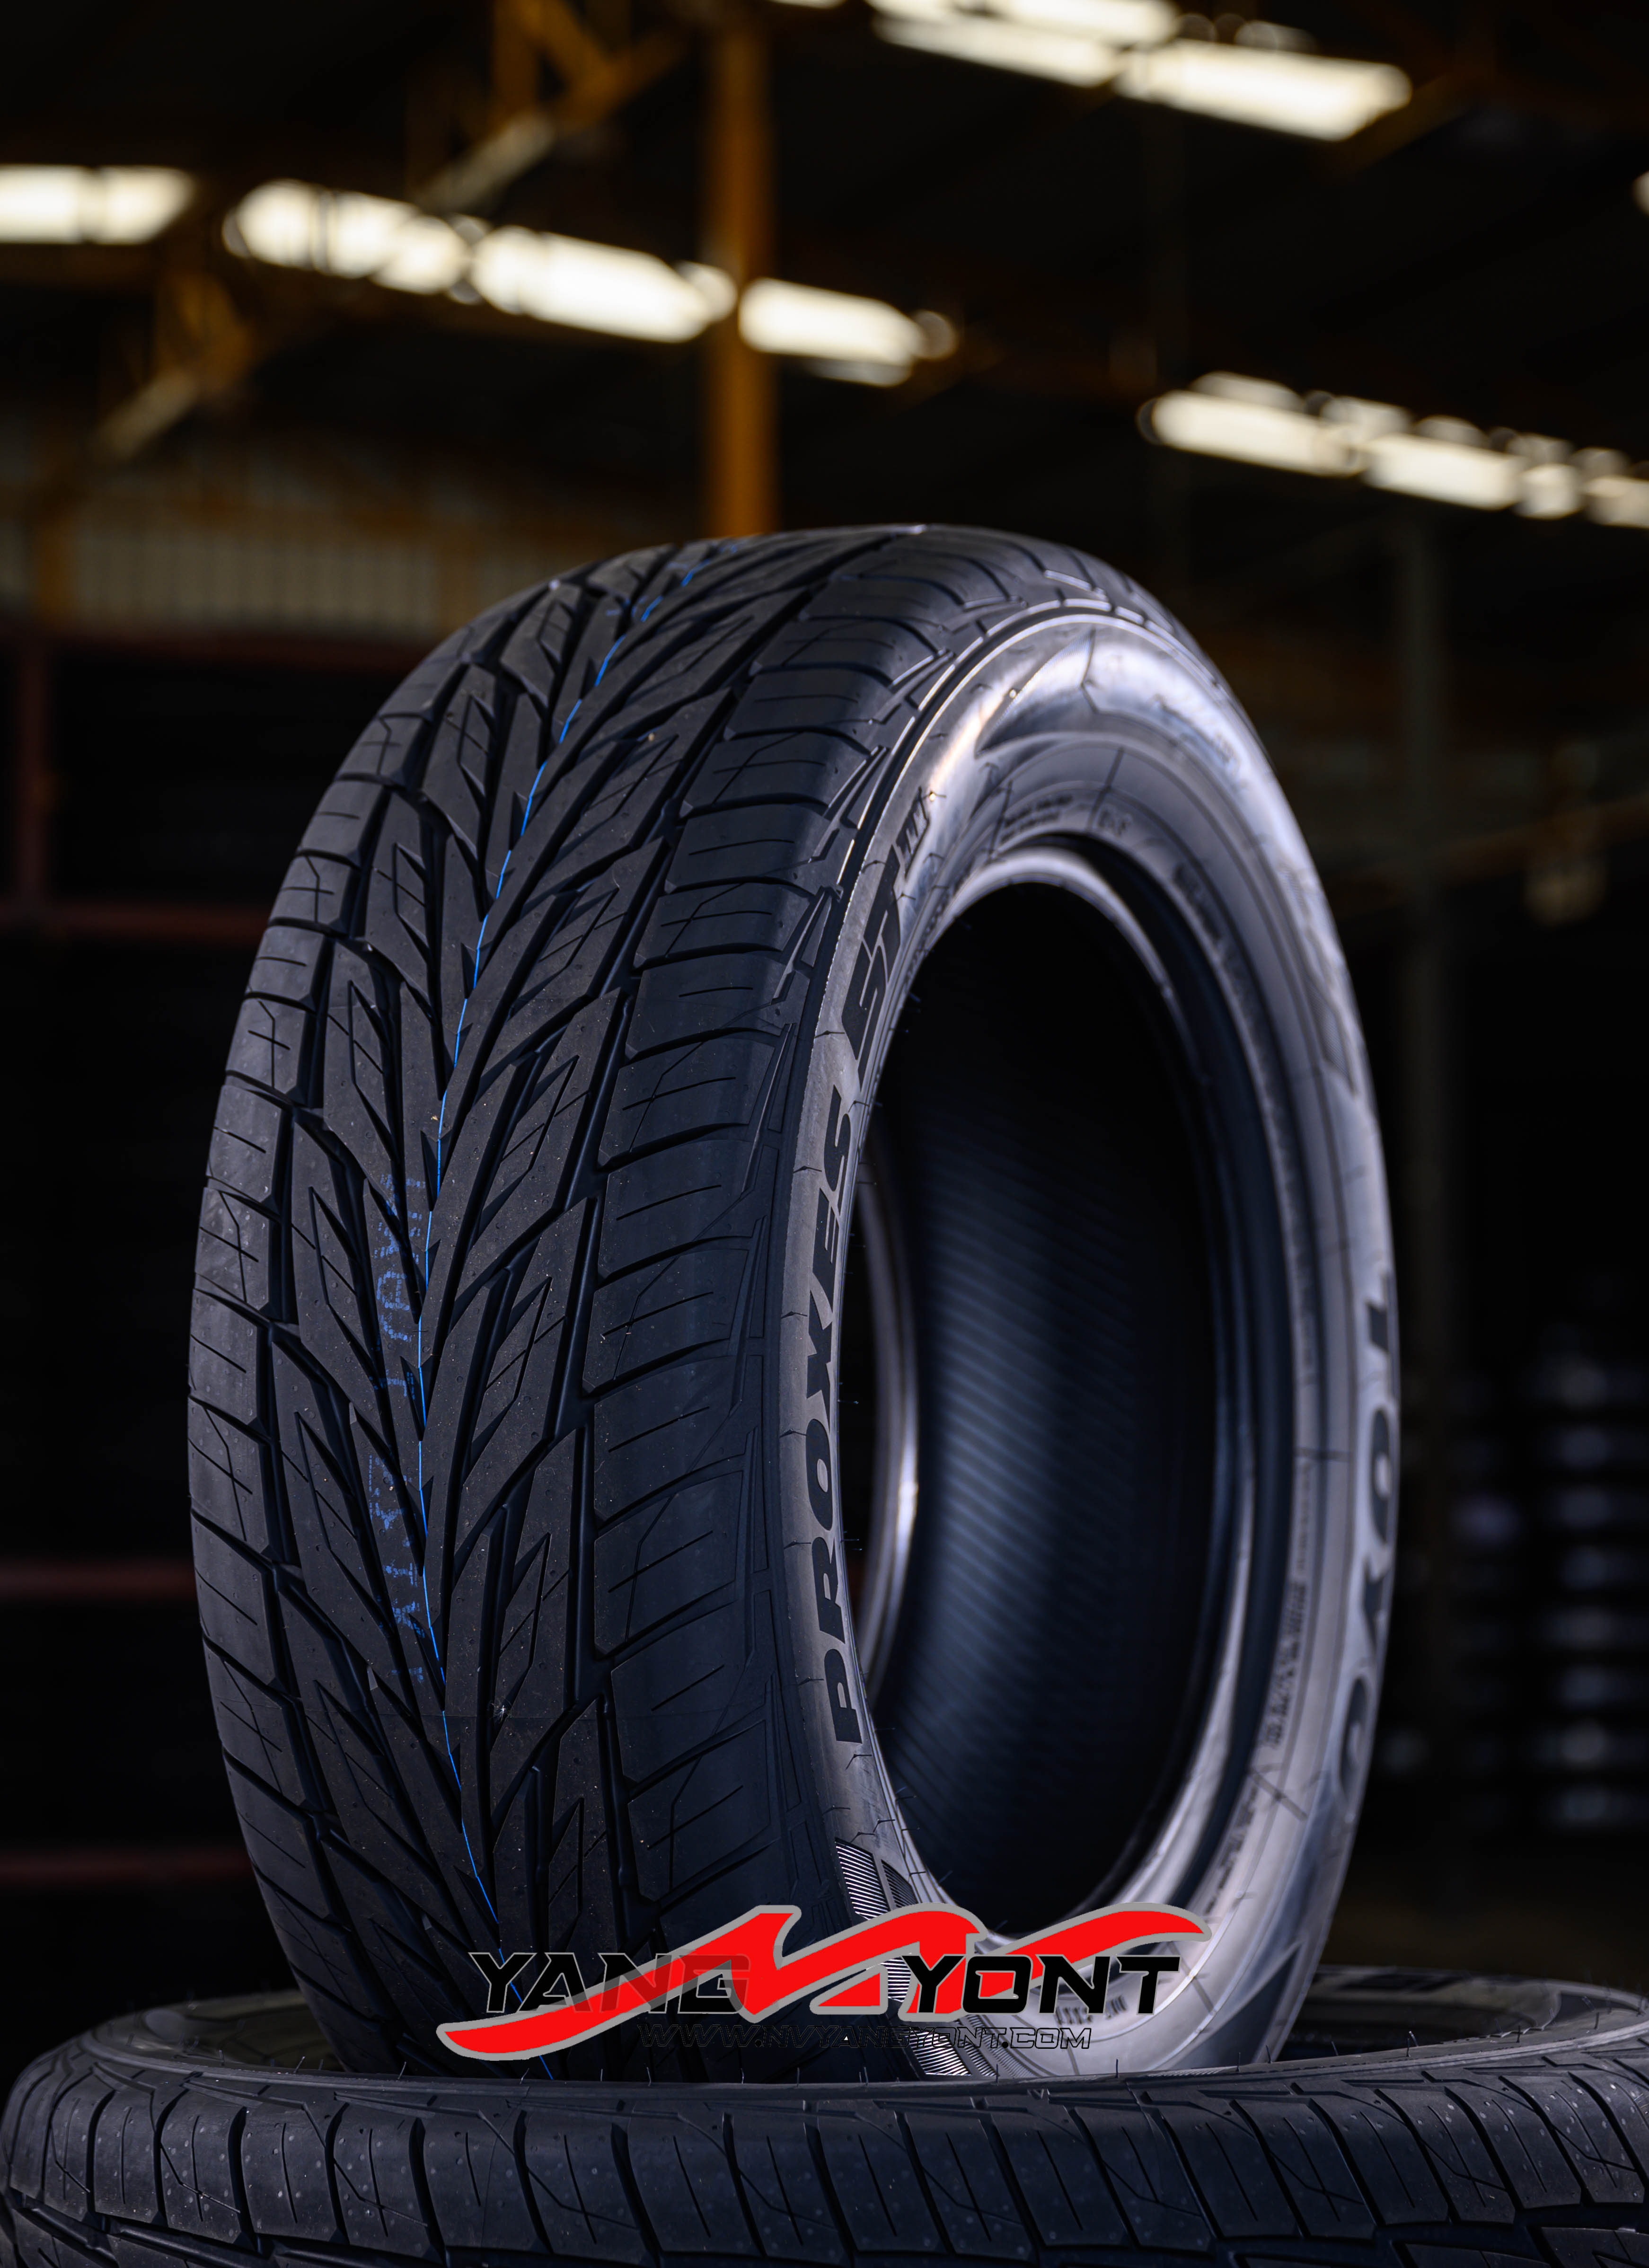 265/45 R 22 PROXES ST III